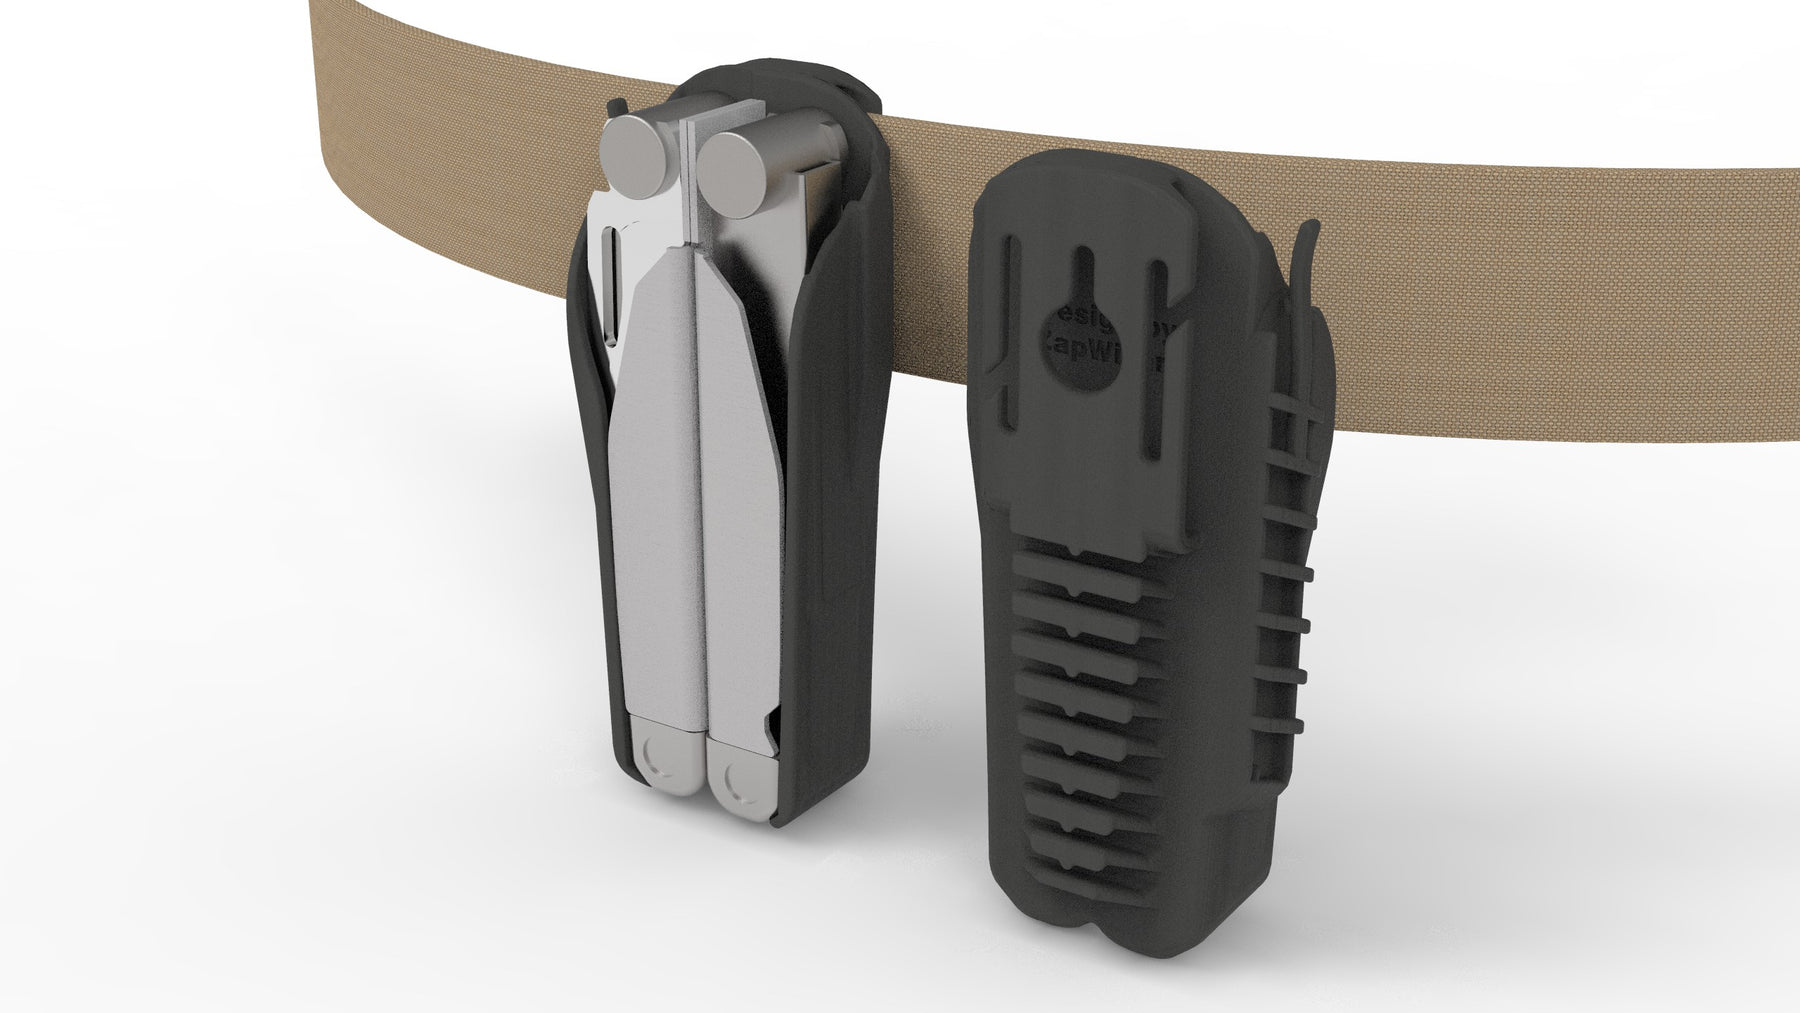 Steel Comb for the Leatherman ARC and FREE series – ZapWizard Design